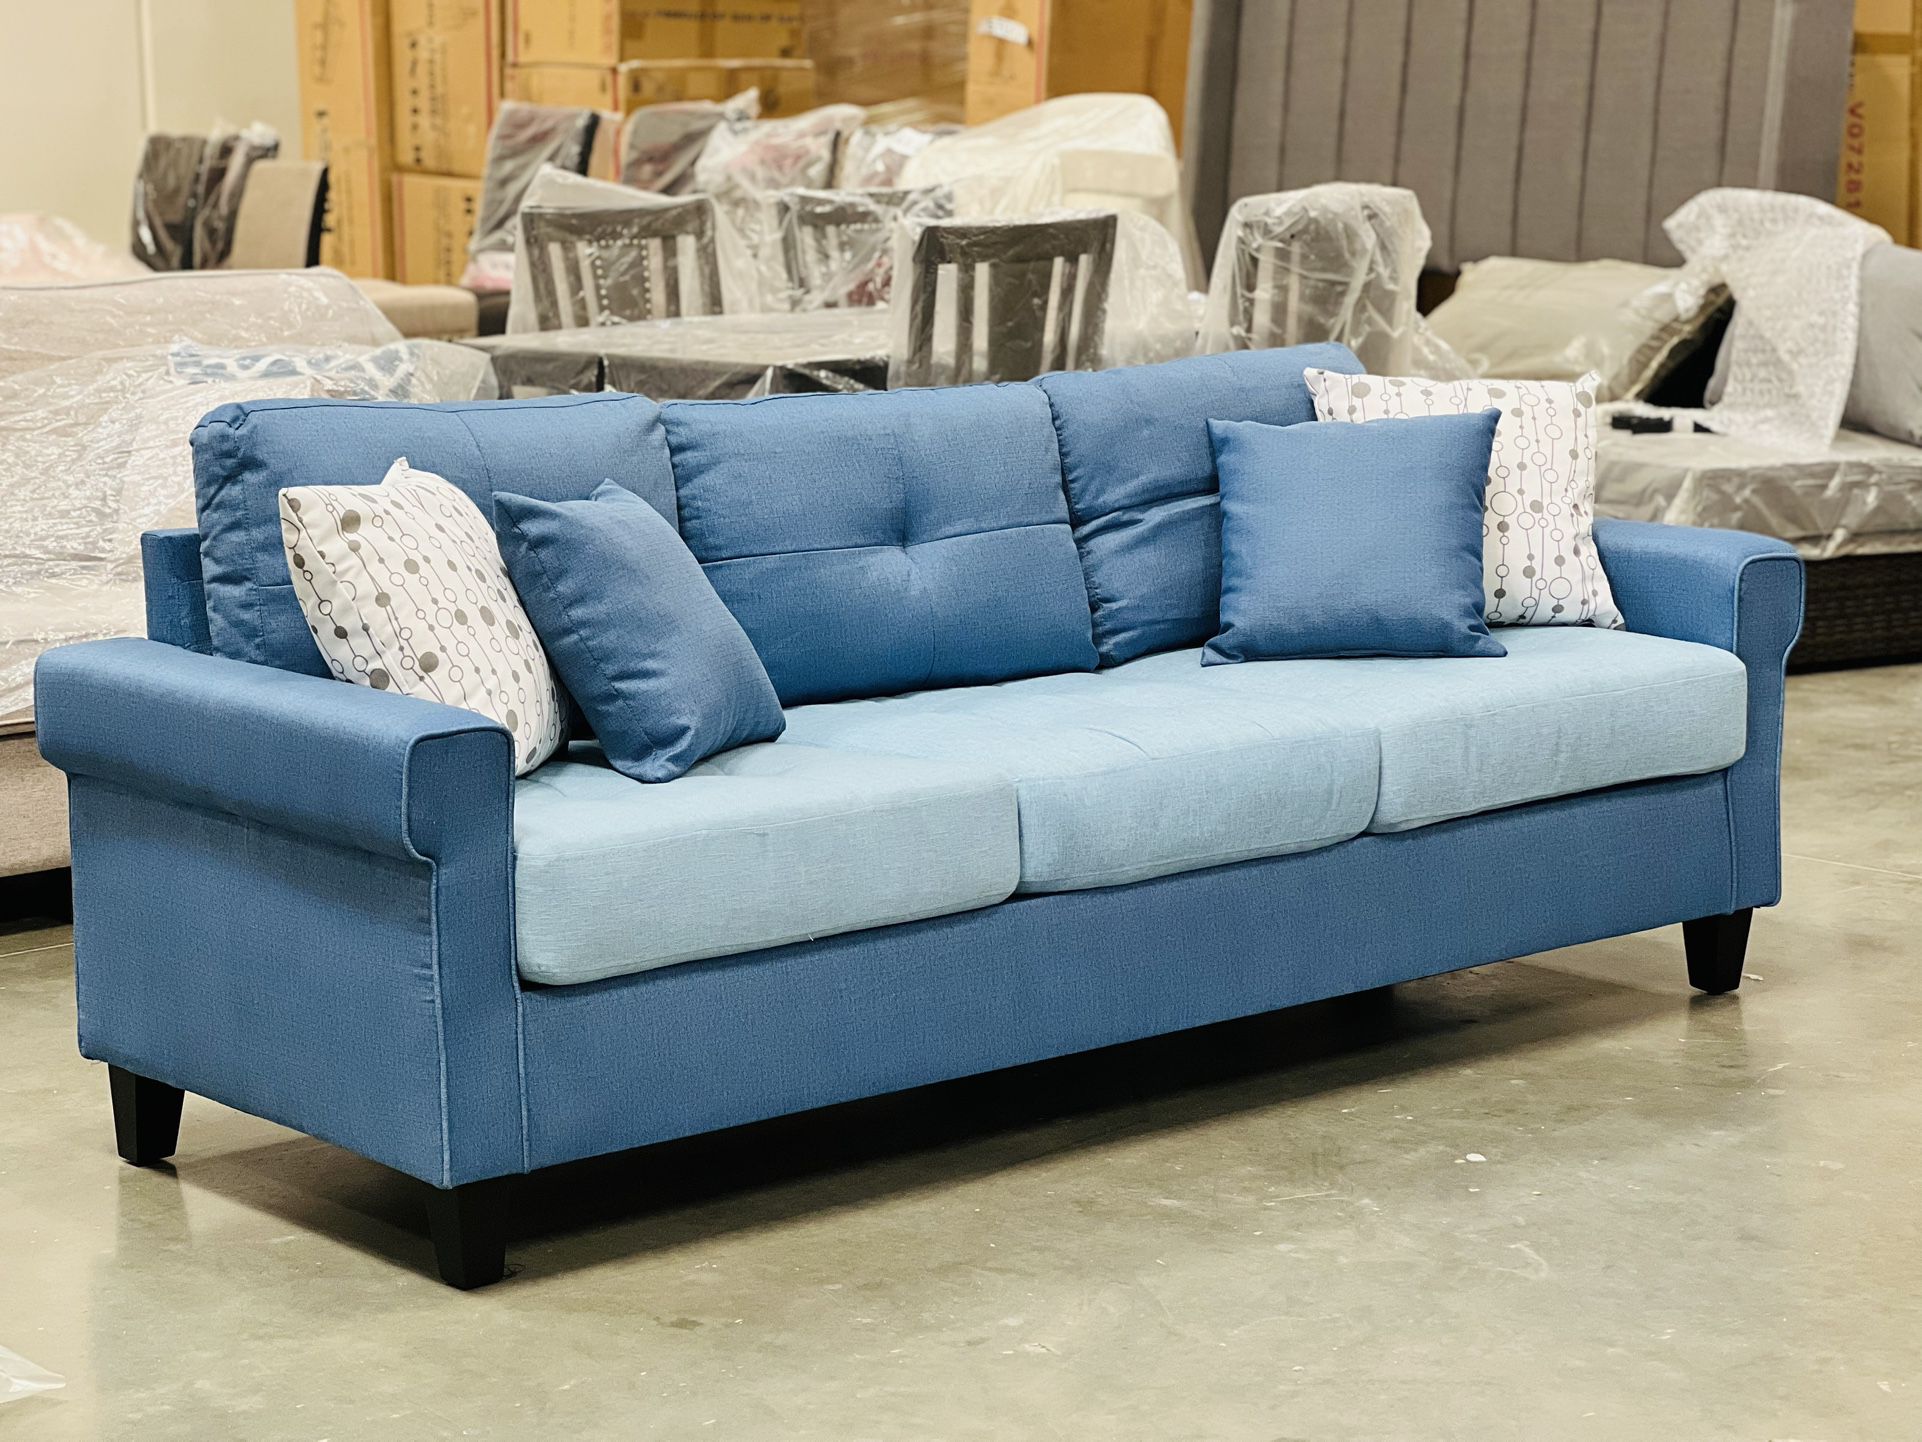 !!New!!! Blue Sofa, Sofa Perfect For Small Living Room, Apartment Sofa, Game room Sofa, Sofa Couch, Small Sofa, Couch